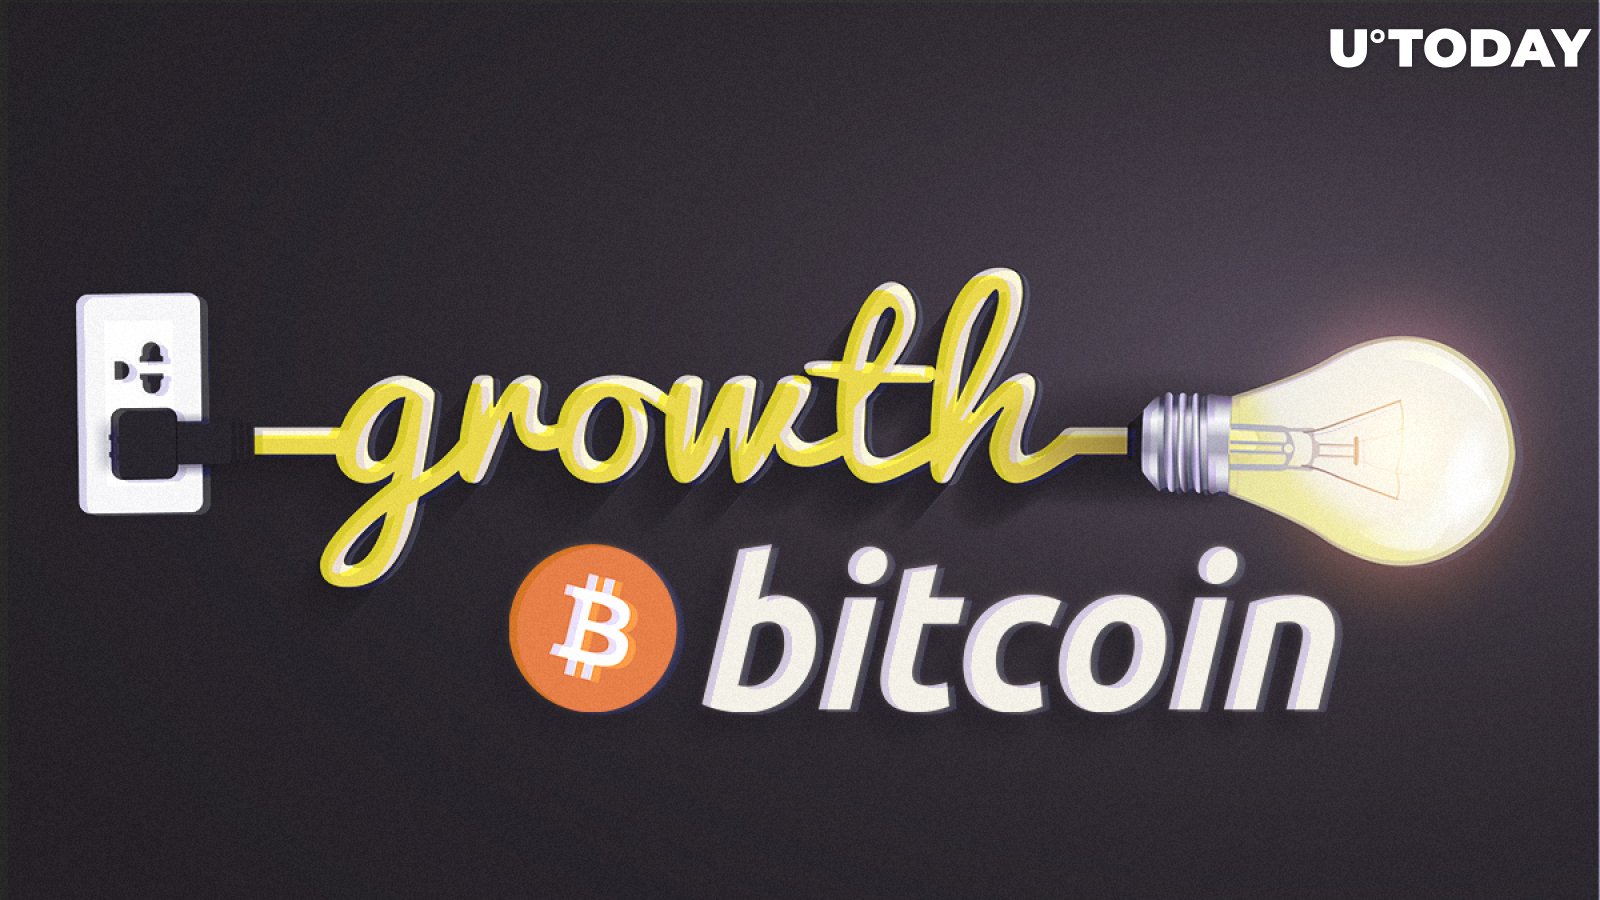 Bitcoin Price Is on the Sure-Shot Way to $7,500. What Do Positive Predictions Accentuate?